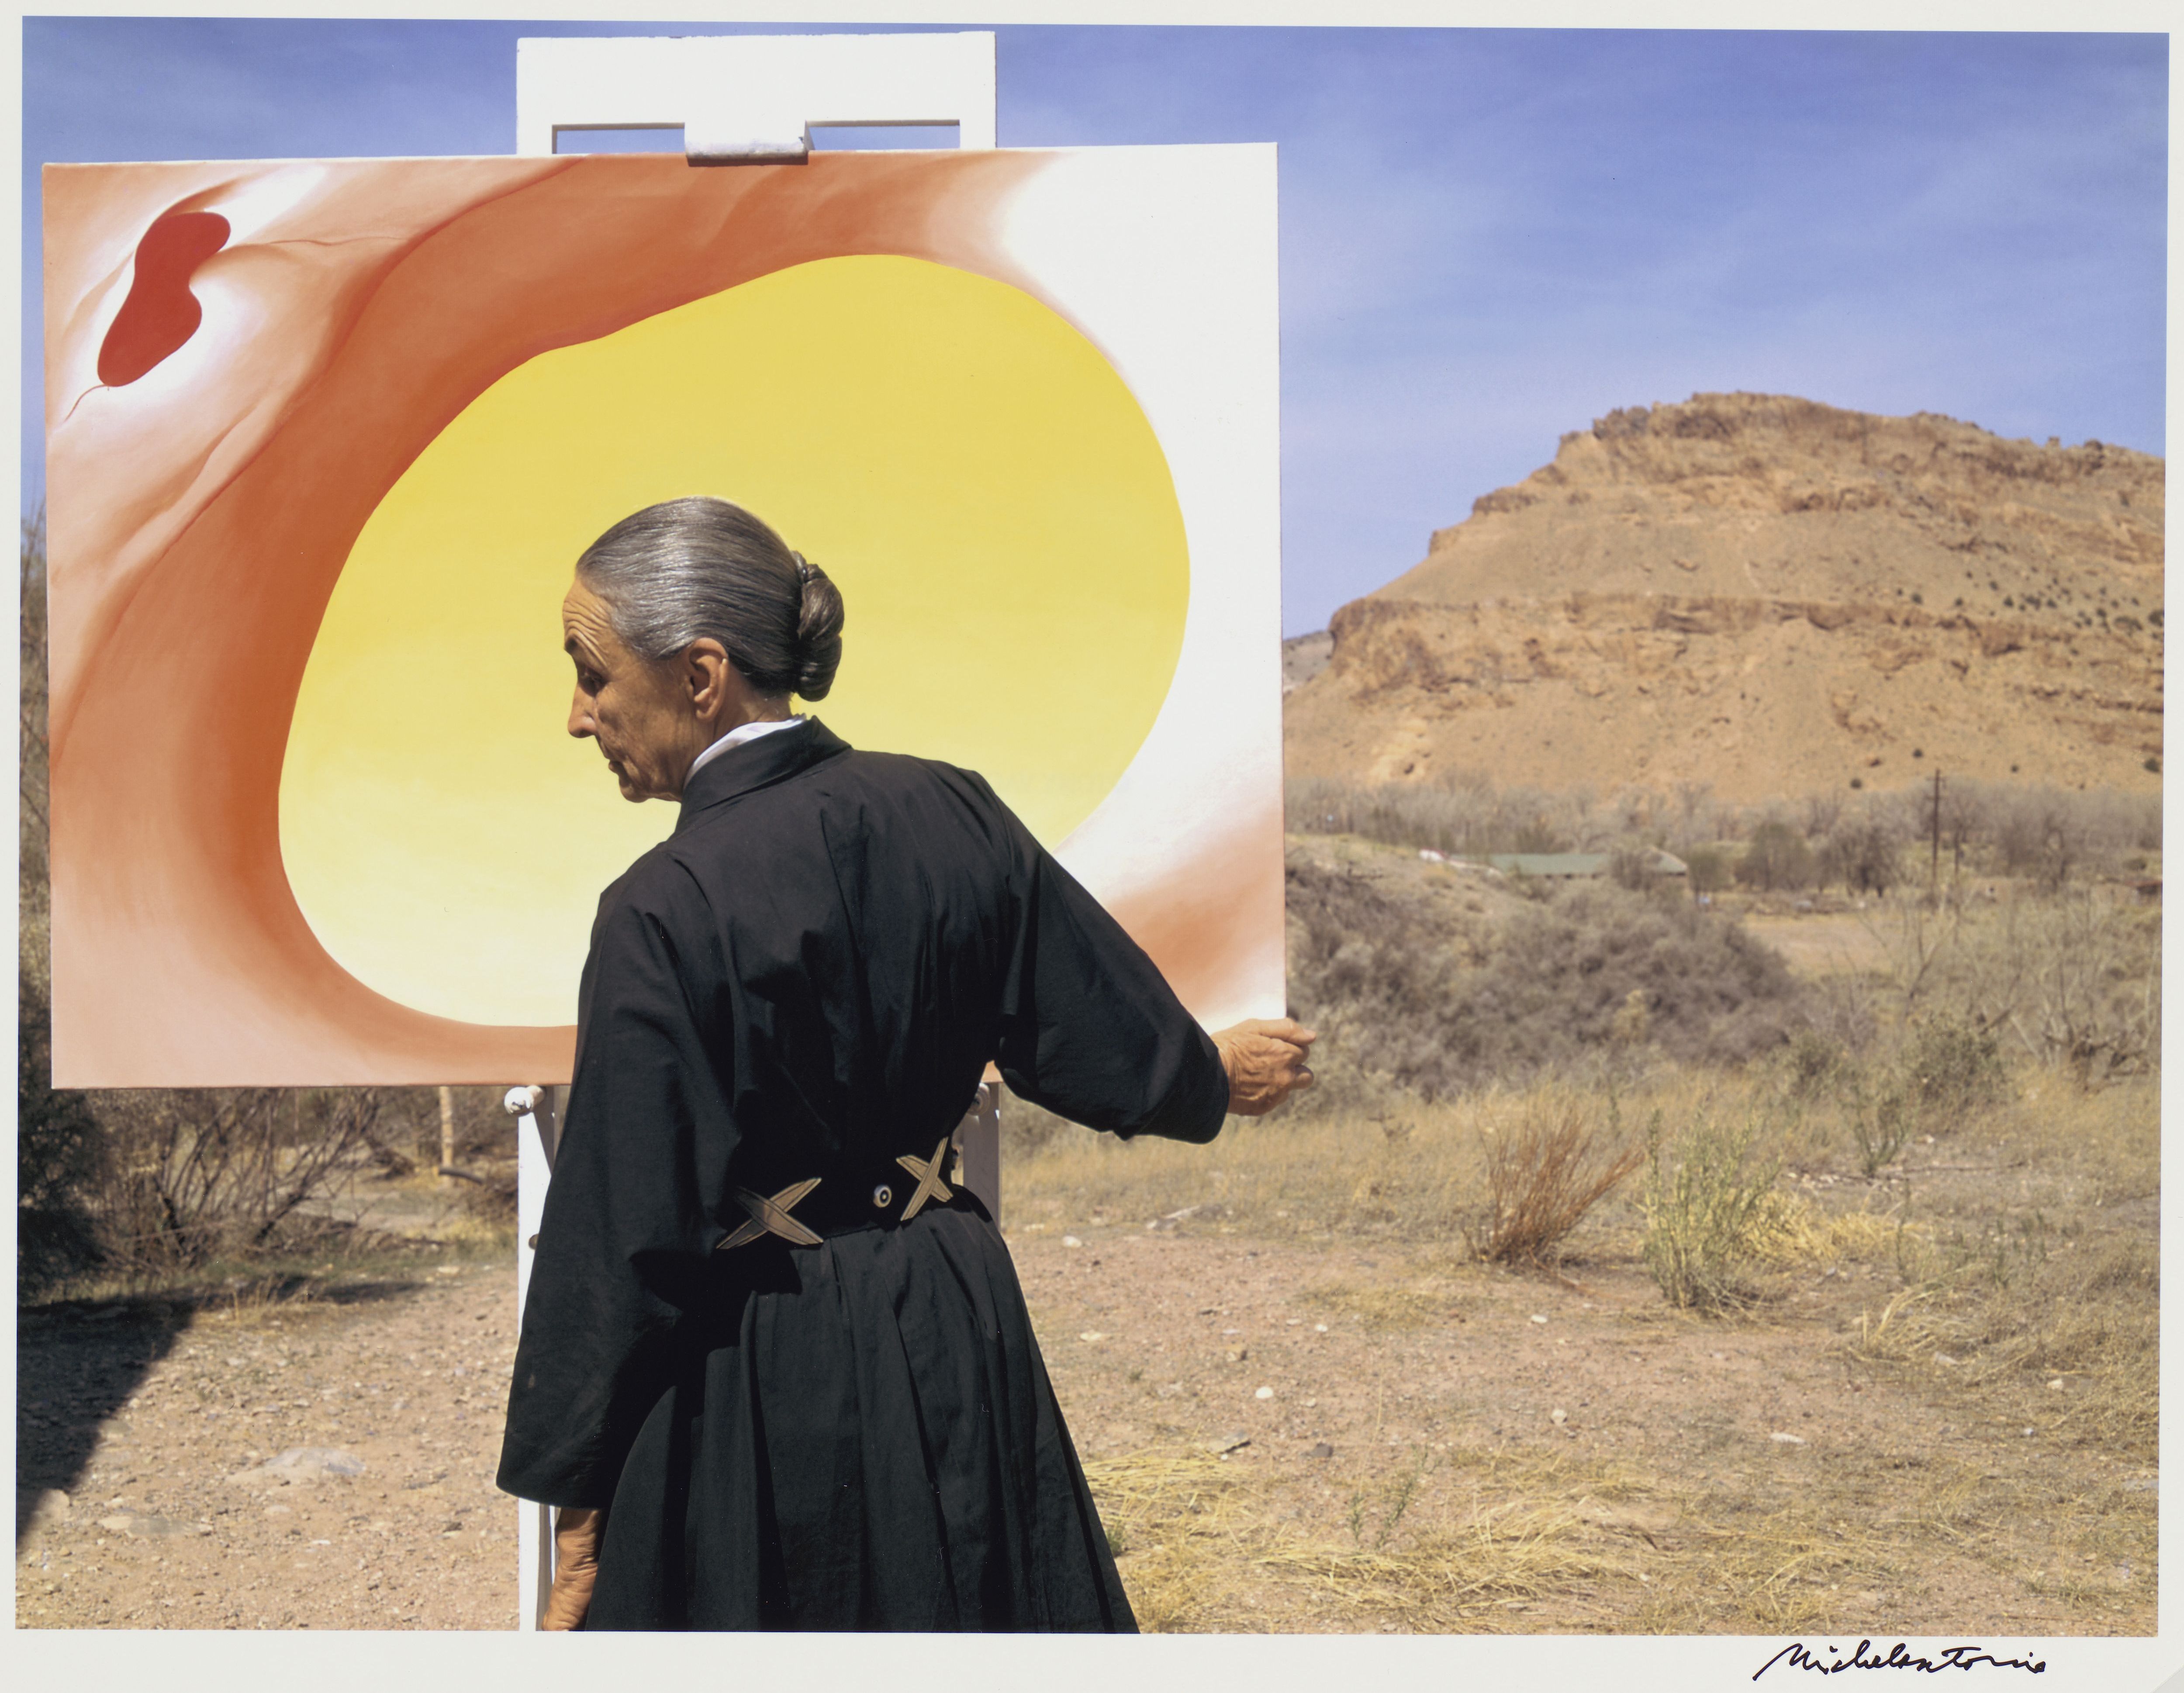 Georgia O'Keeffe with "Pelvis Series, Red with Yellow" and the desert. 1960. Photo: Tony Vaccaro. Source: Georgia O'Keeffe Museum